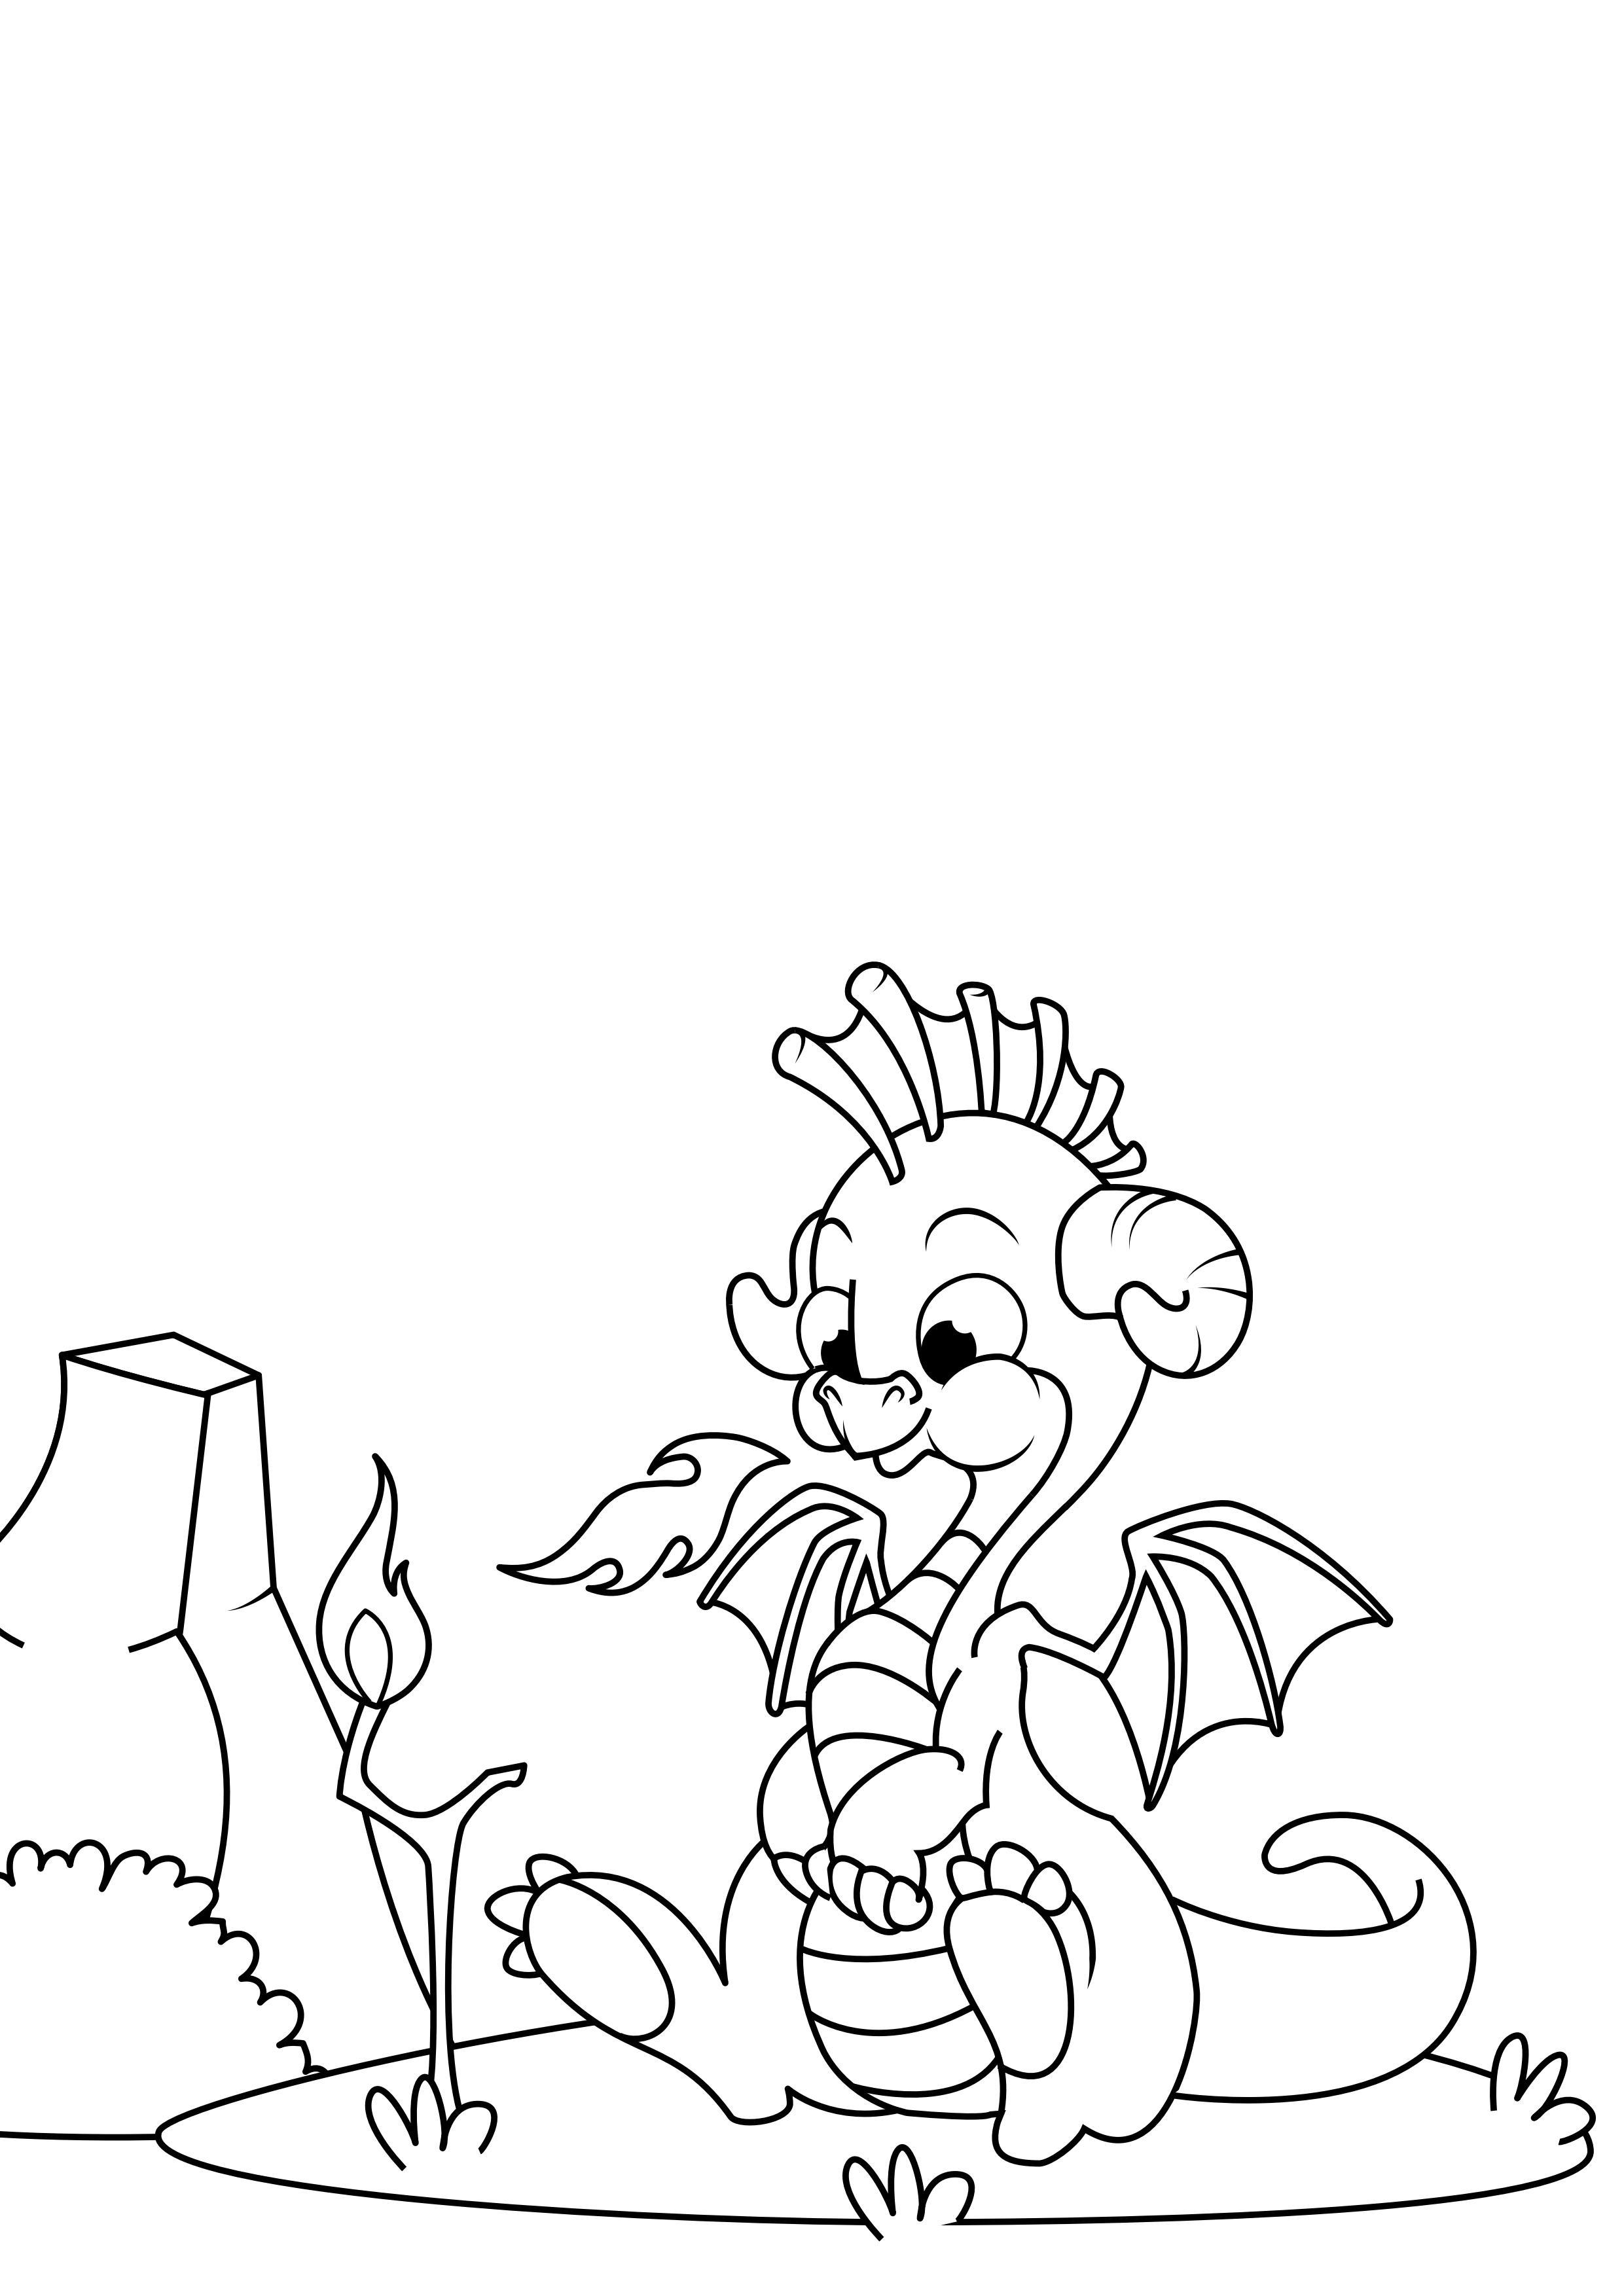 Coloring page Dragon plays with fire